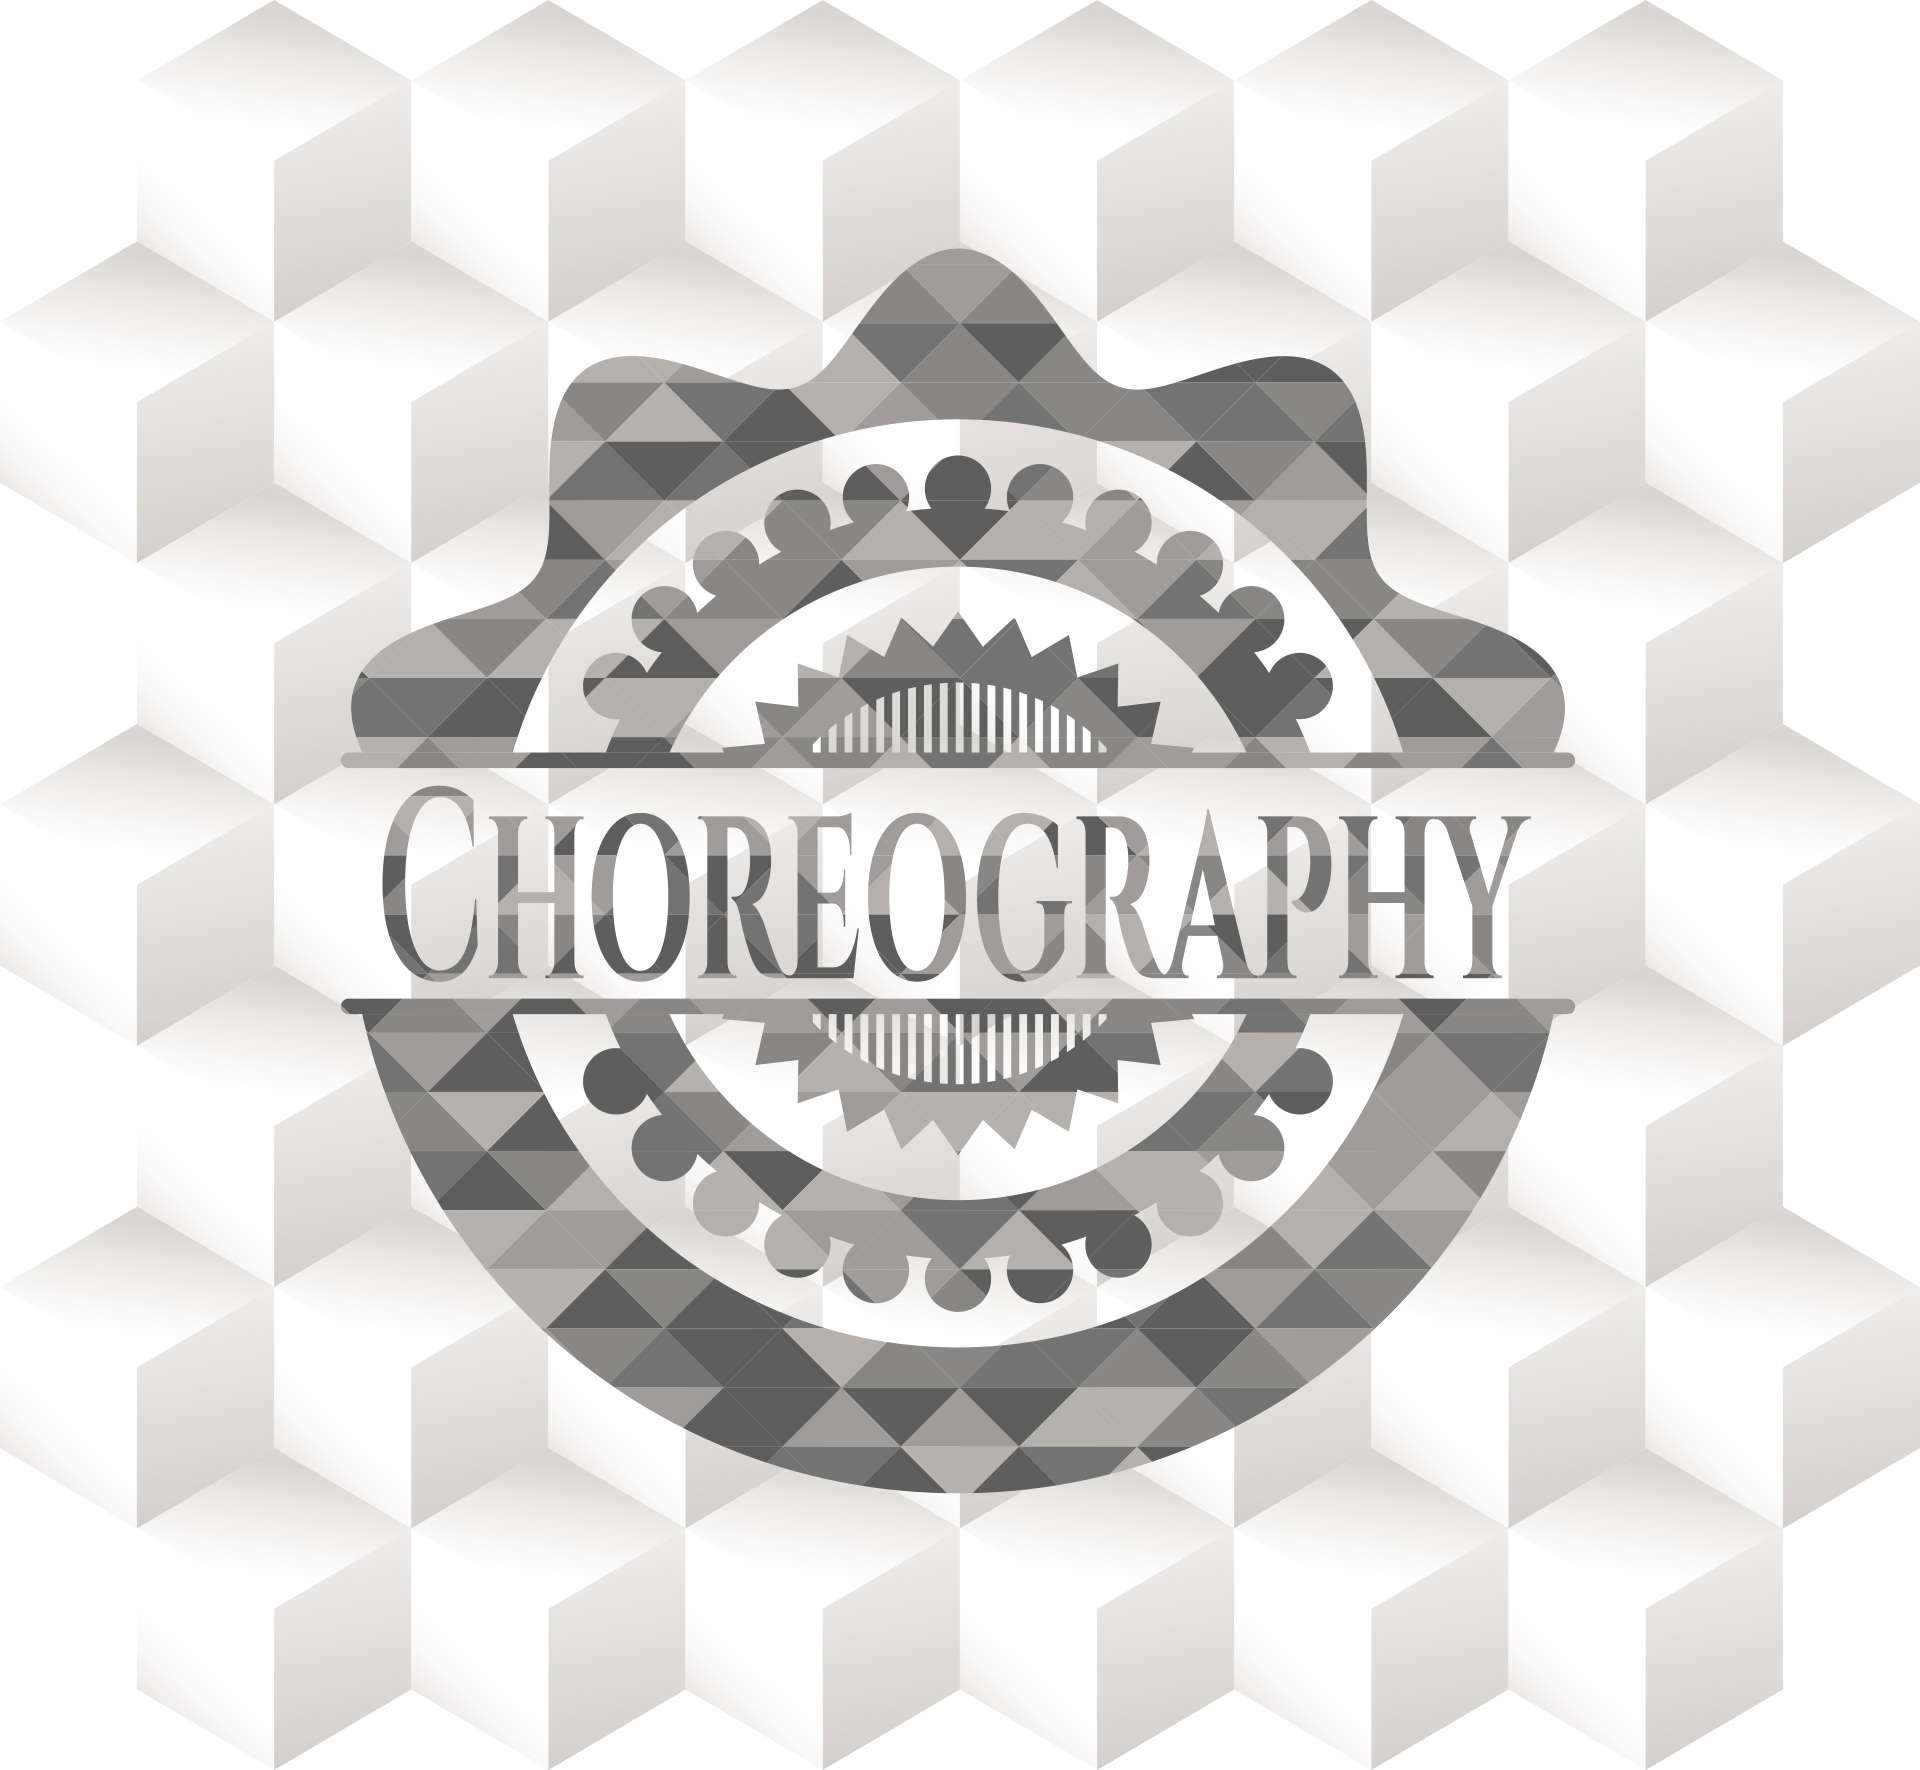 Choreography Between Services